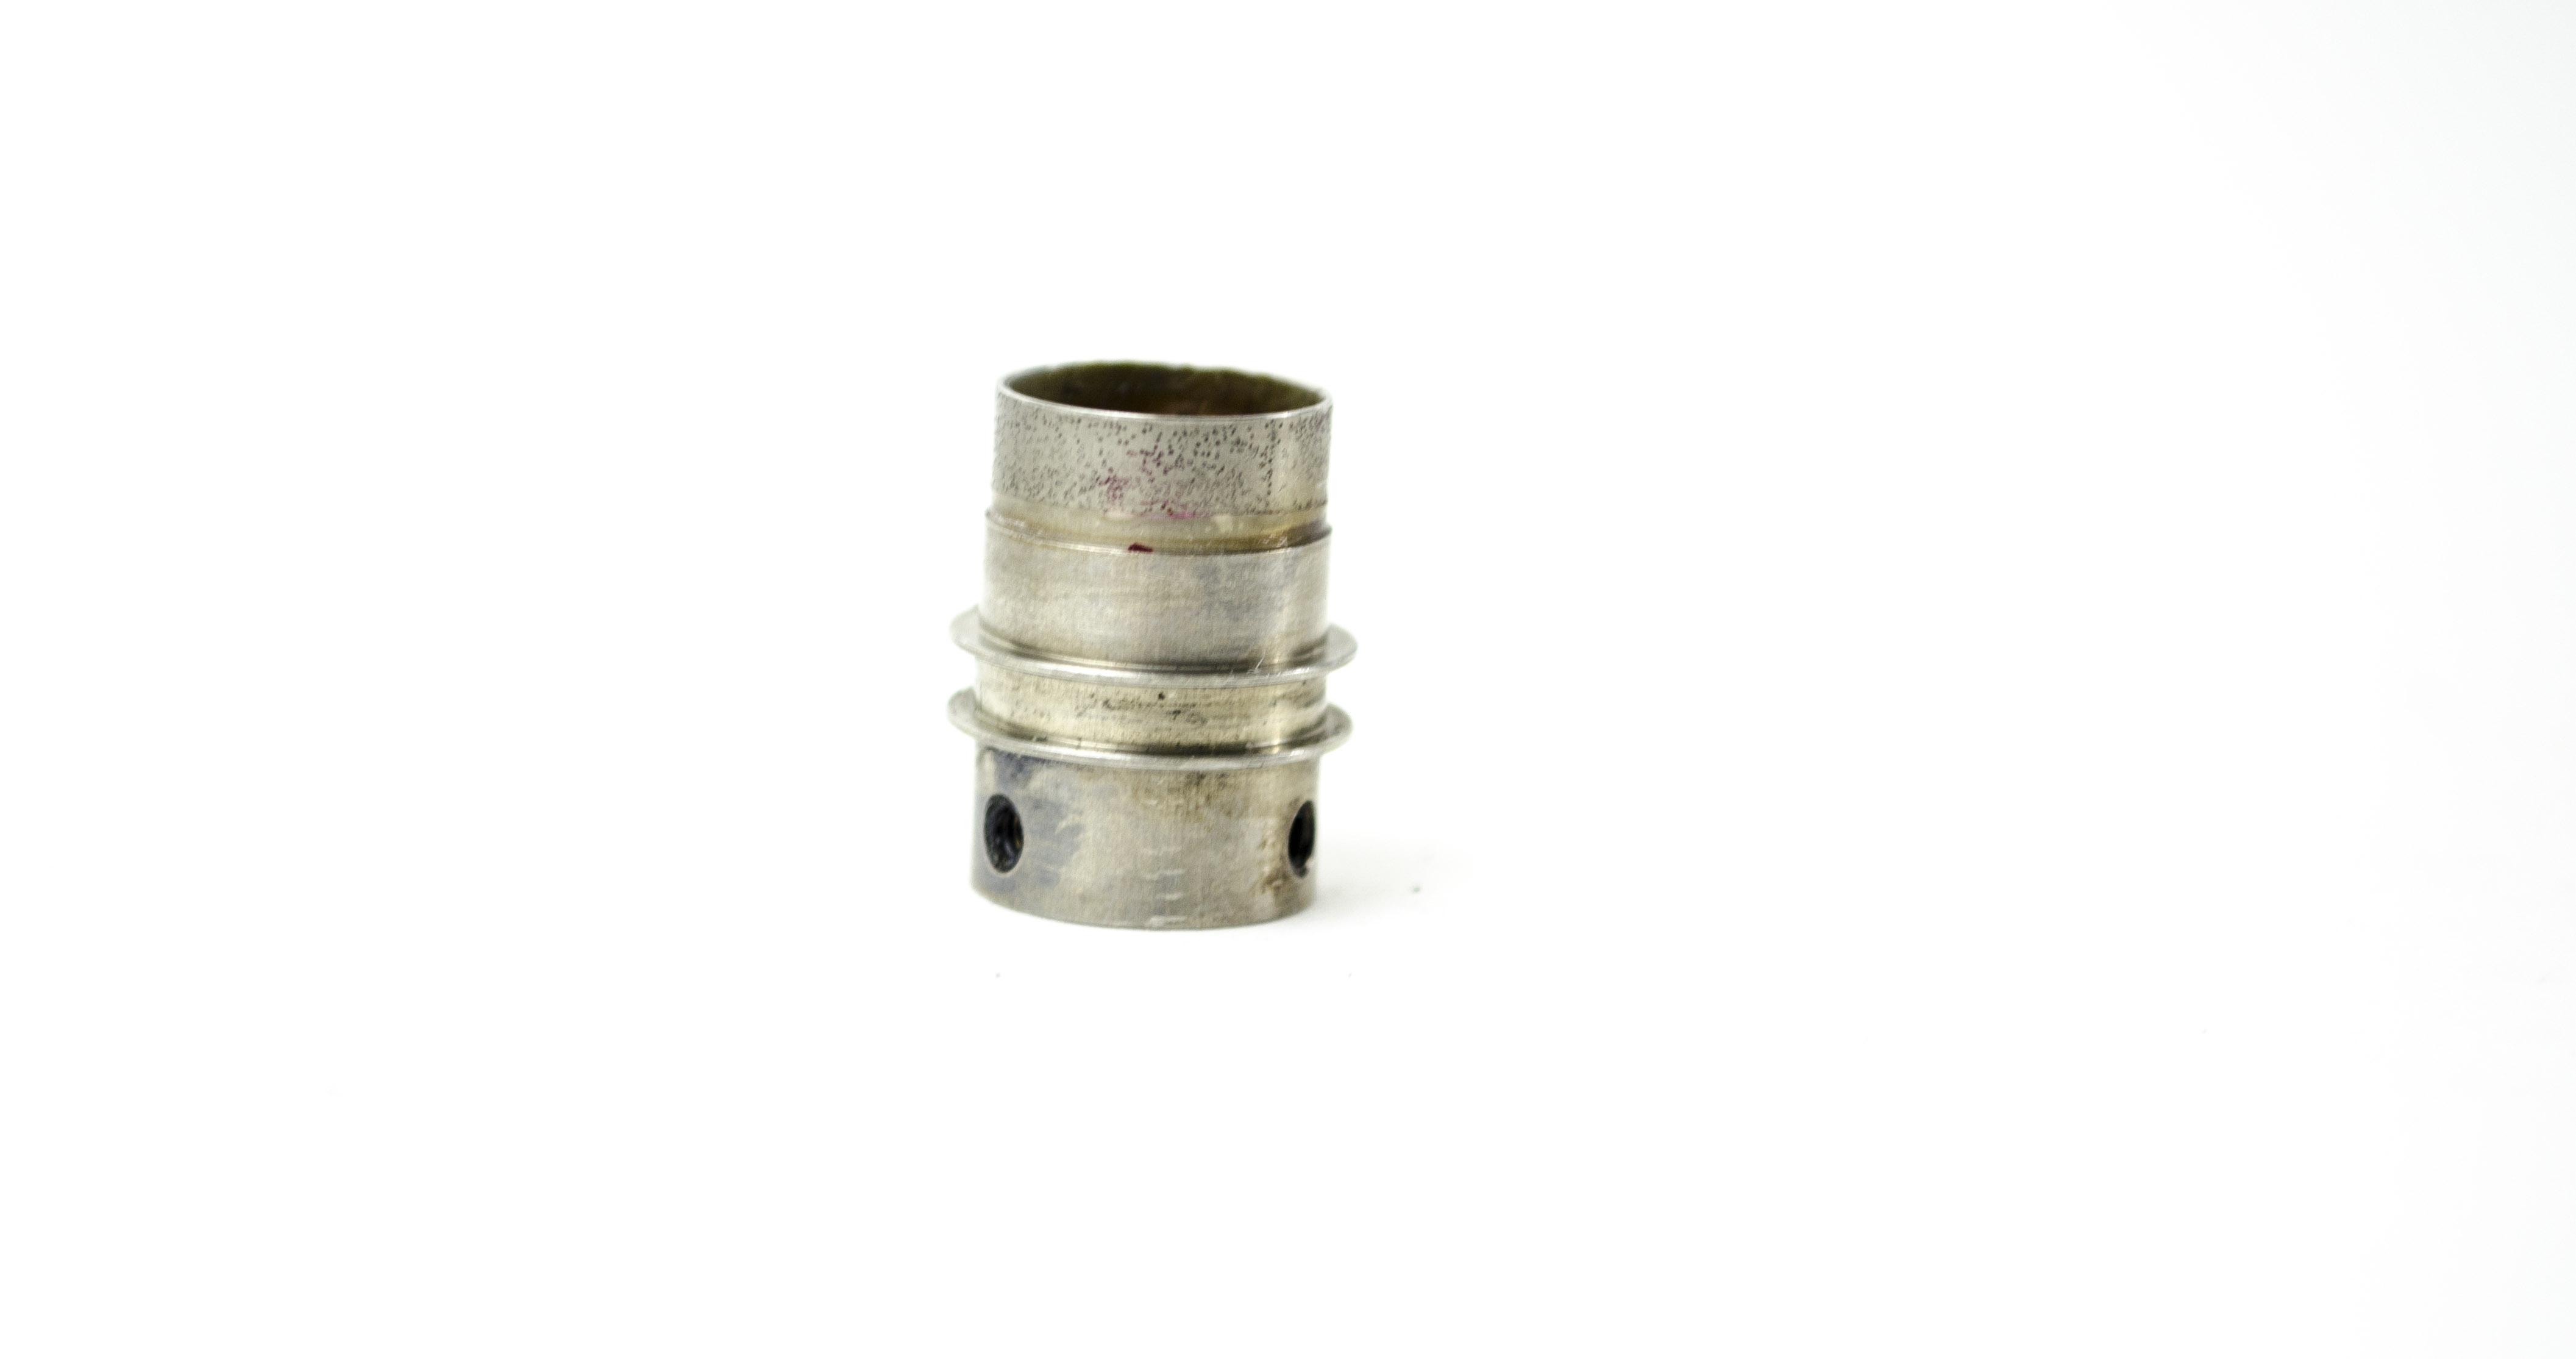 OEM Insertion Tube Proximal End Fitting - GIF-Q260